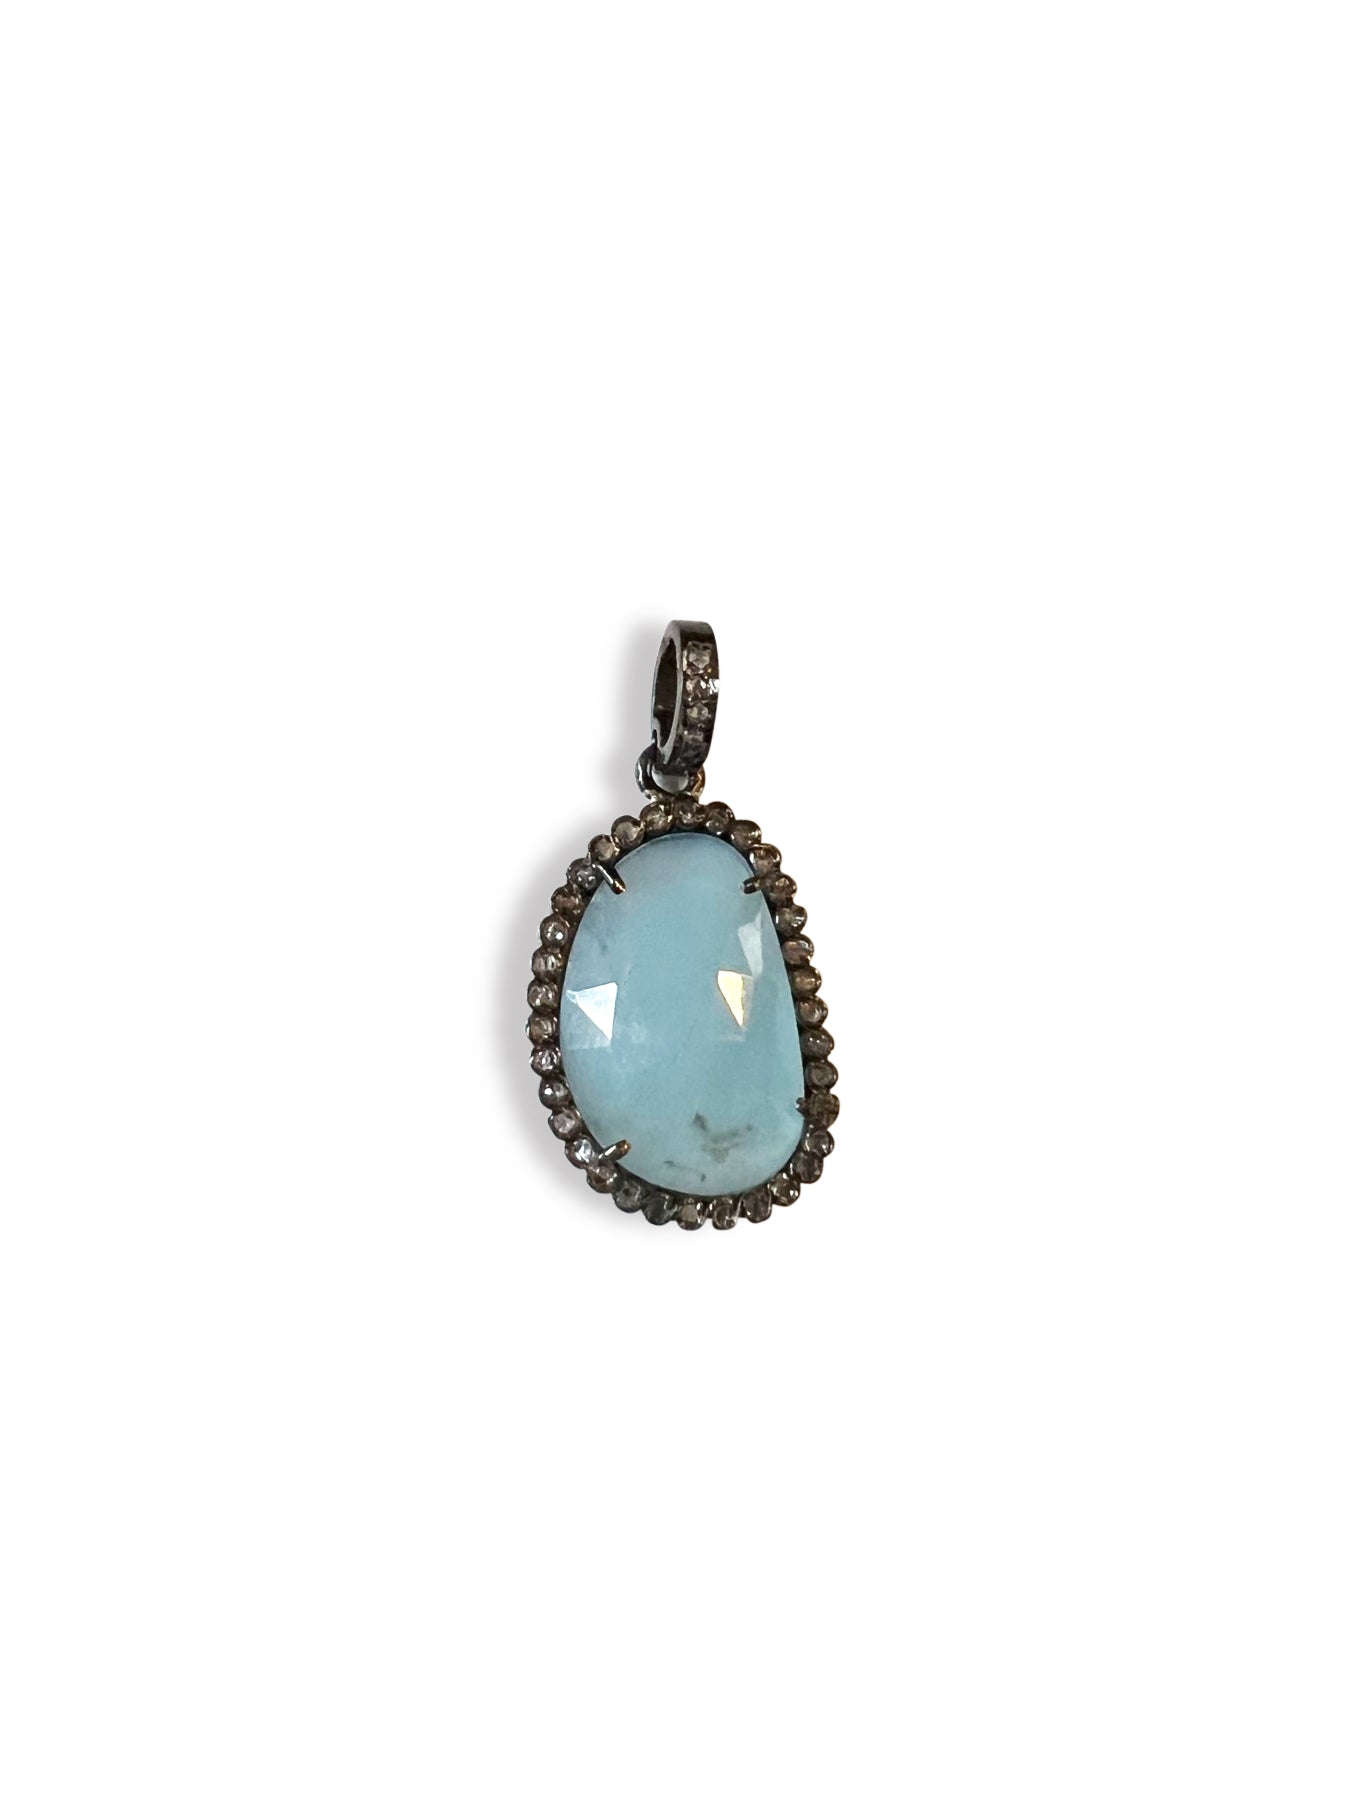 Aquamarine with Pave Diamonds set in Sterling Silver